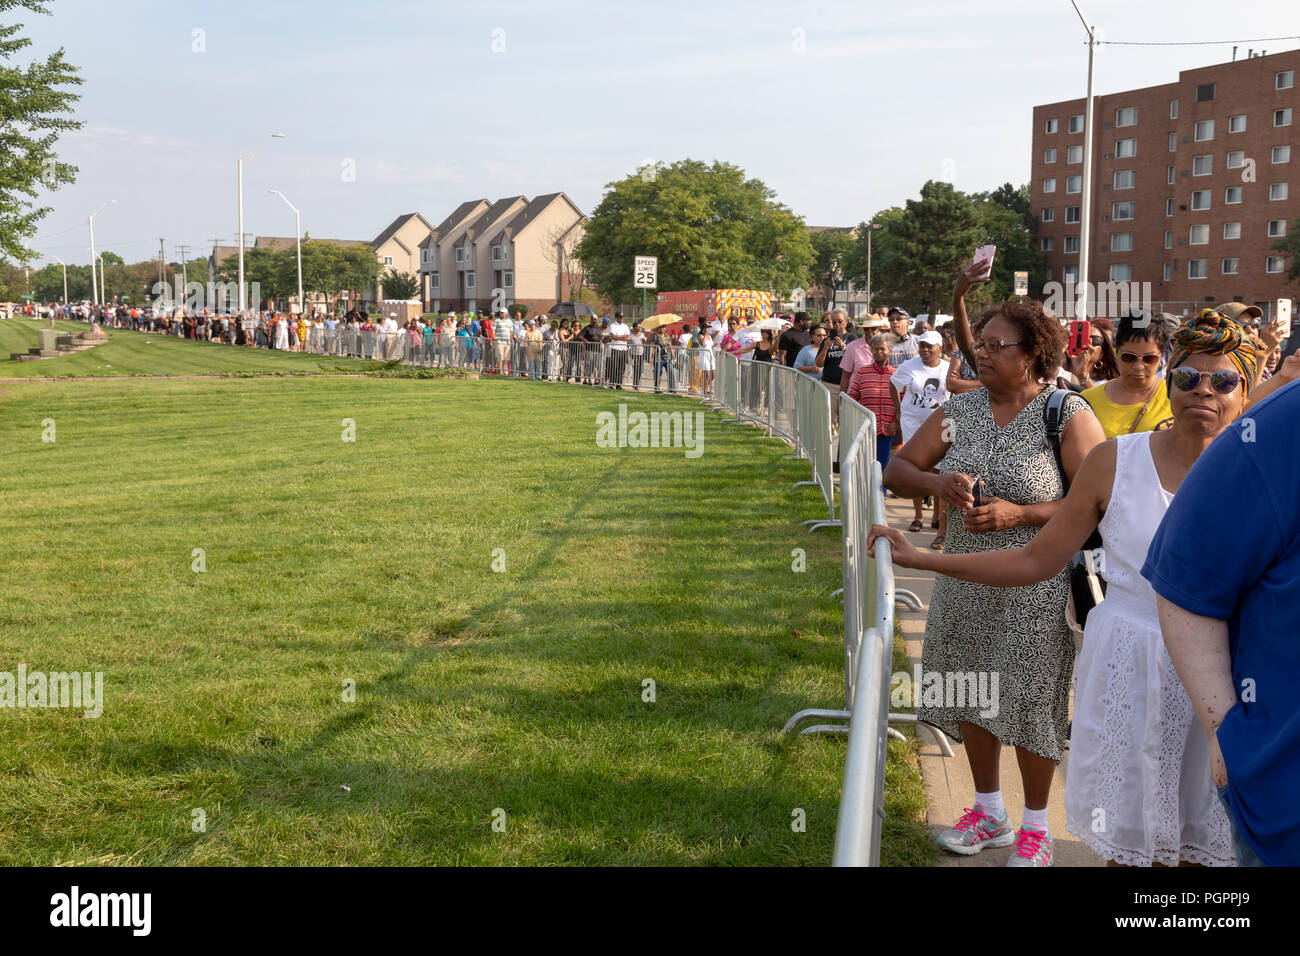 Detroit, Michigan USA - 28 August 2018 - Thousands waited in long lines to enter the Charles H. Wright Museum of African American History to pay last respects to Aretha Franklin during two days of public viewing. Franklin died August 16. Credit: Jim West/Alamy Live News Stock Photo